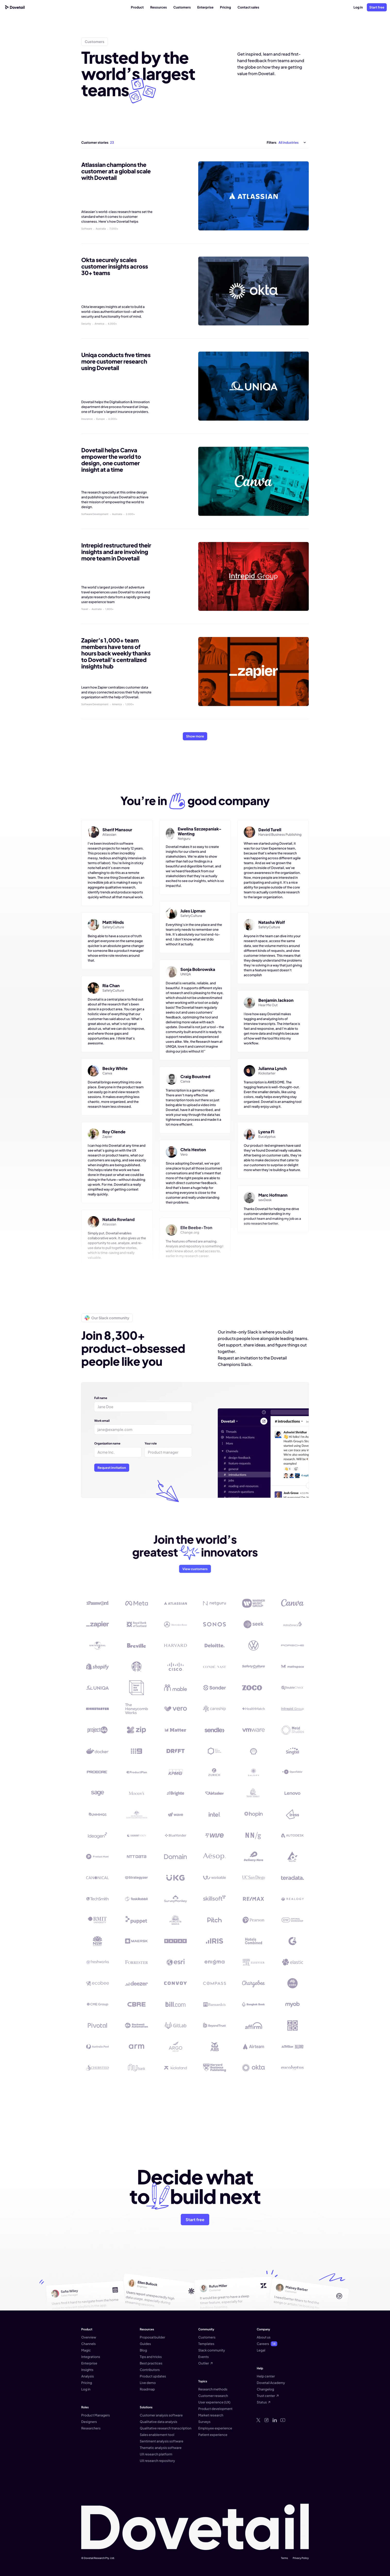 Dovetail Landing Page Example: The flexible Customer Insights Hub for teams and businesses that get you from data to insights fast, no matter the research method.